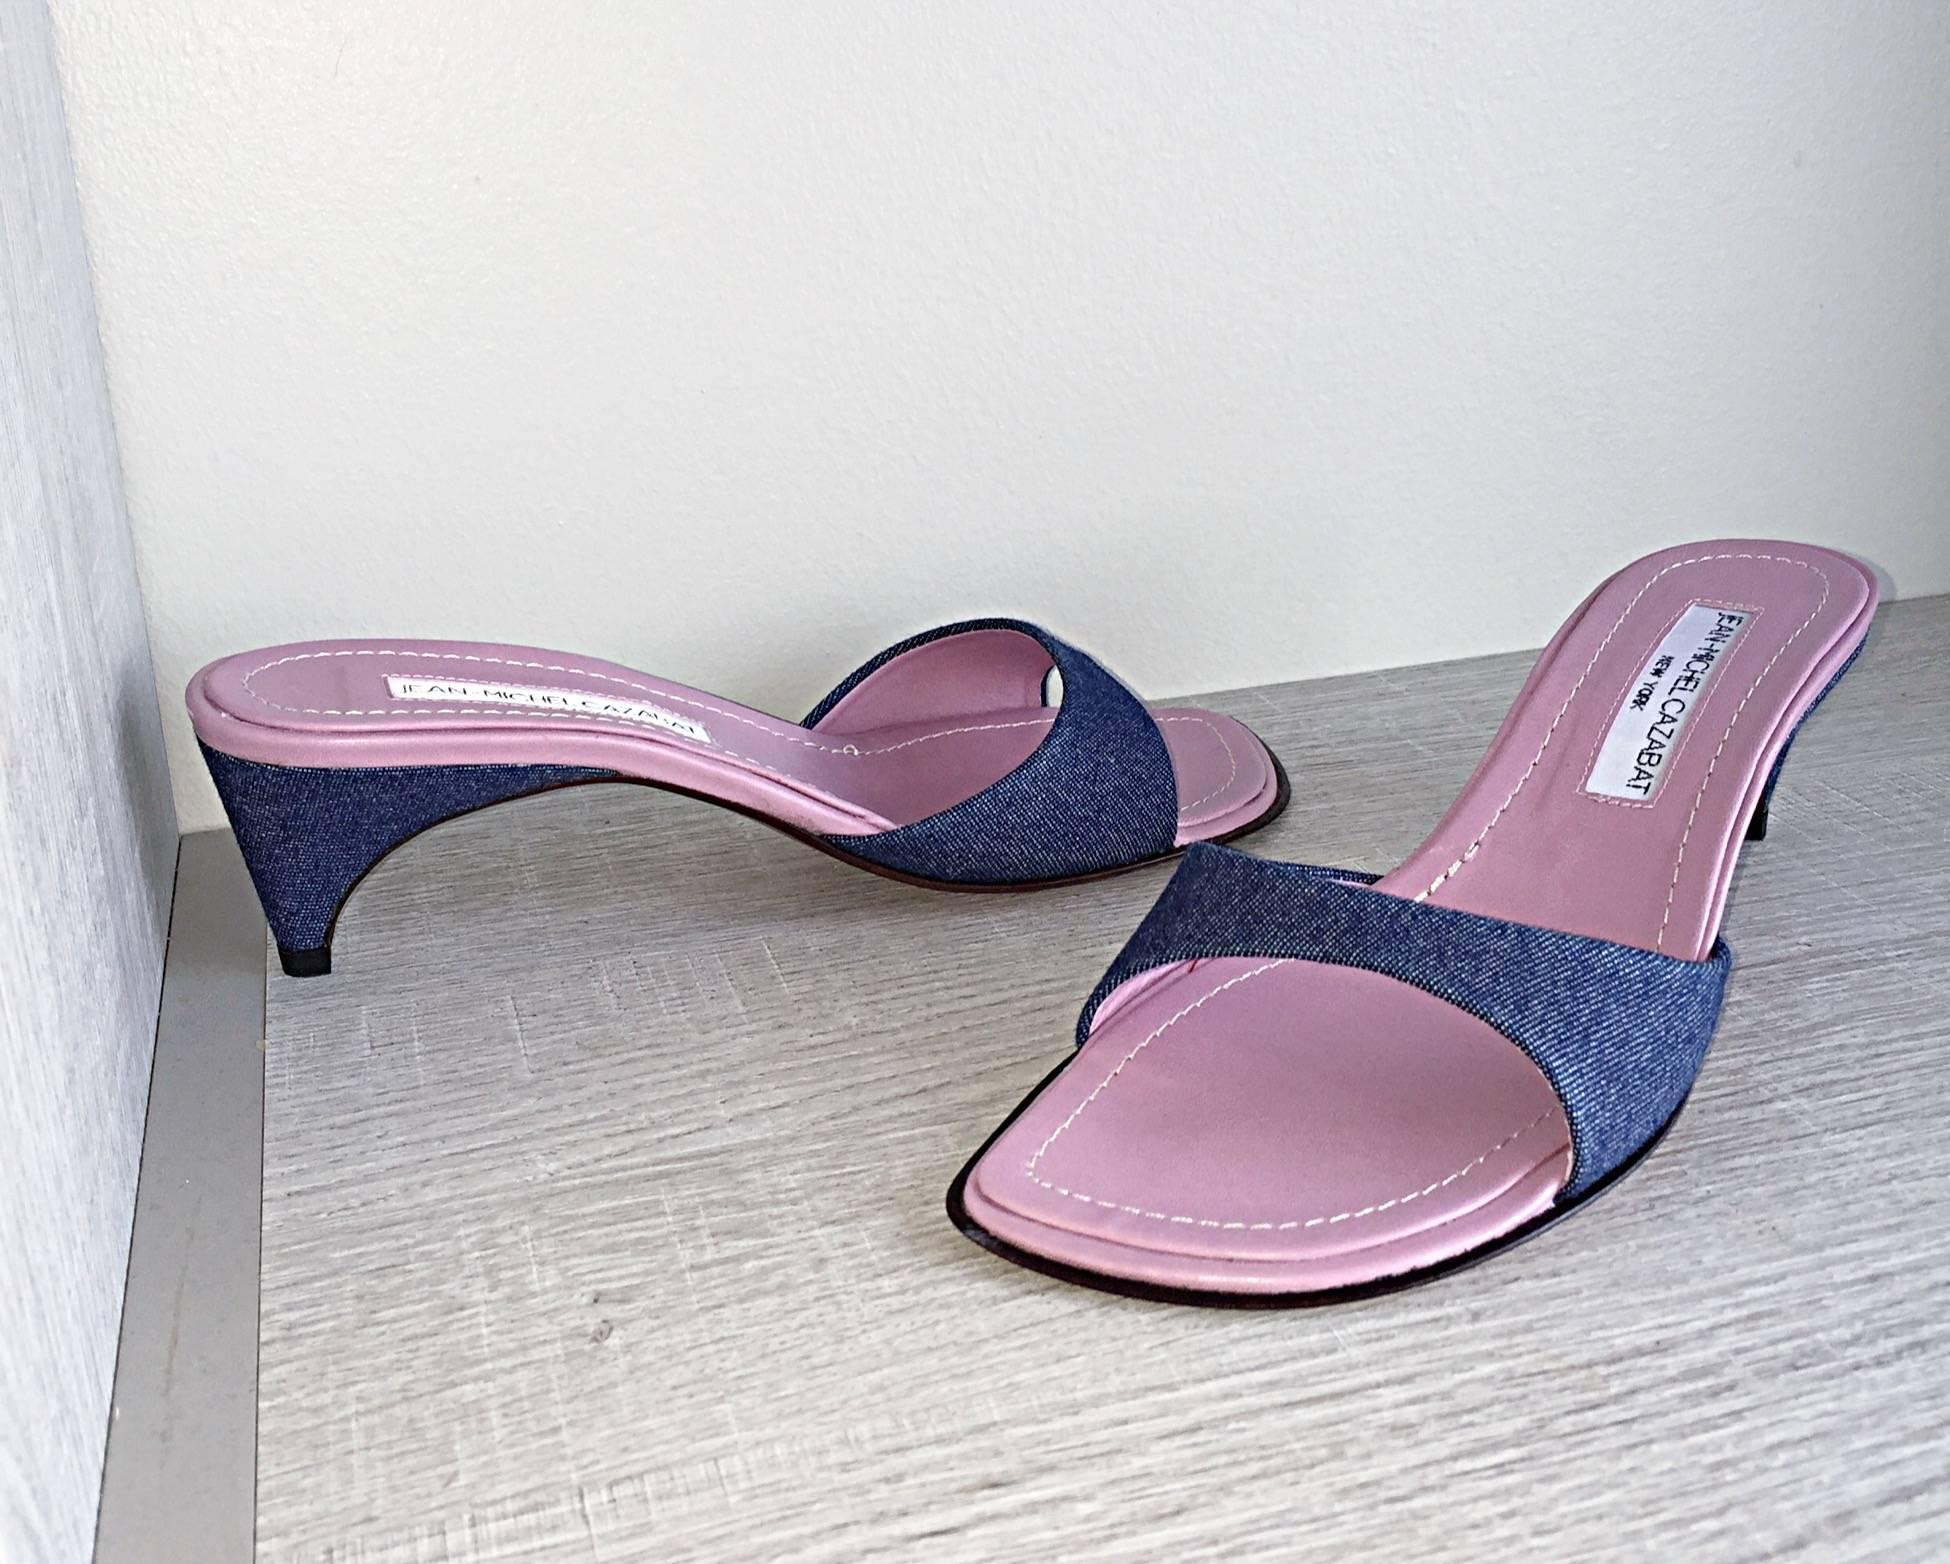 Brand new pair of JEAN-MICHELE CAZABAT denim kitten heel sandals /slides! From his debut collection (under his own name) in 1999! Dark denim, with a lilac leather insole. Features a vibrant red bottom sole. Avant Garde structured heel. Looks great